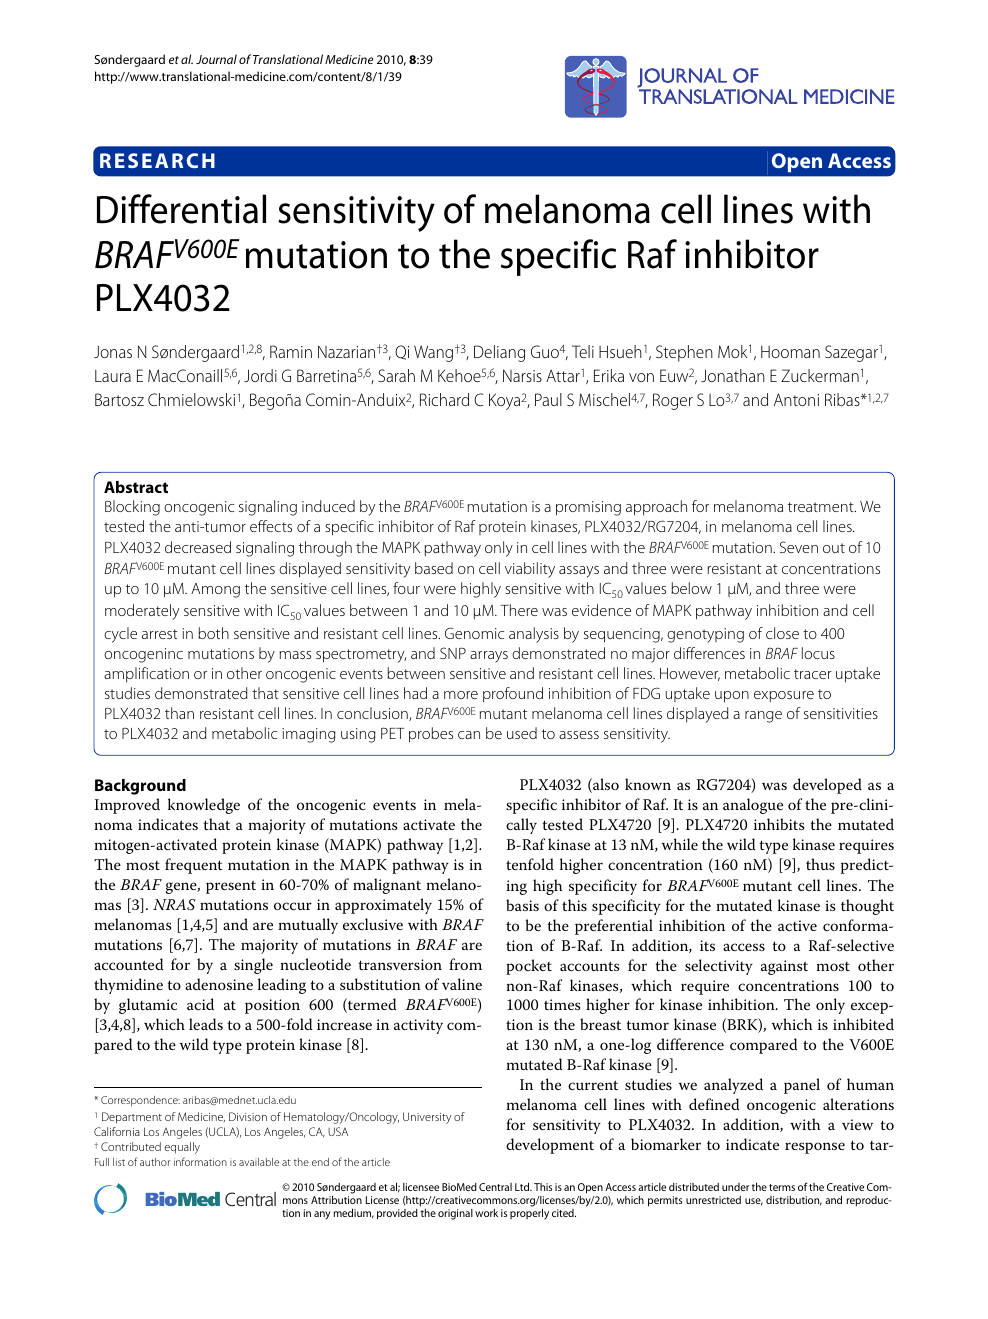 Differential Sensitivity Of Melanoma Cell Lines With Brafv600e Mutation To The Specific Raf Inhibitor Plx4032 Topic Of Research Paper In Biological Sciences Download Scholarly Article Pdf And Read For Free On